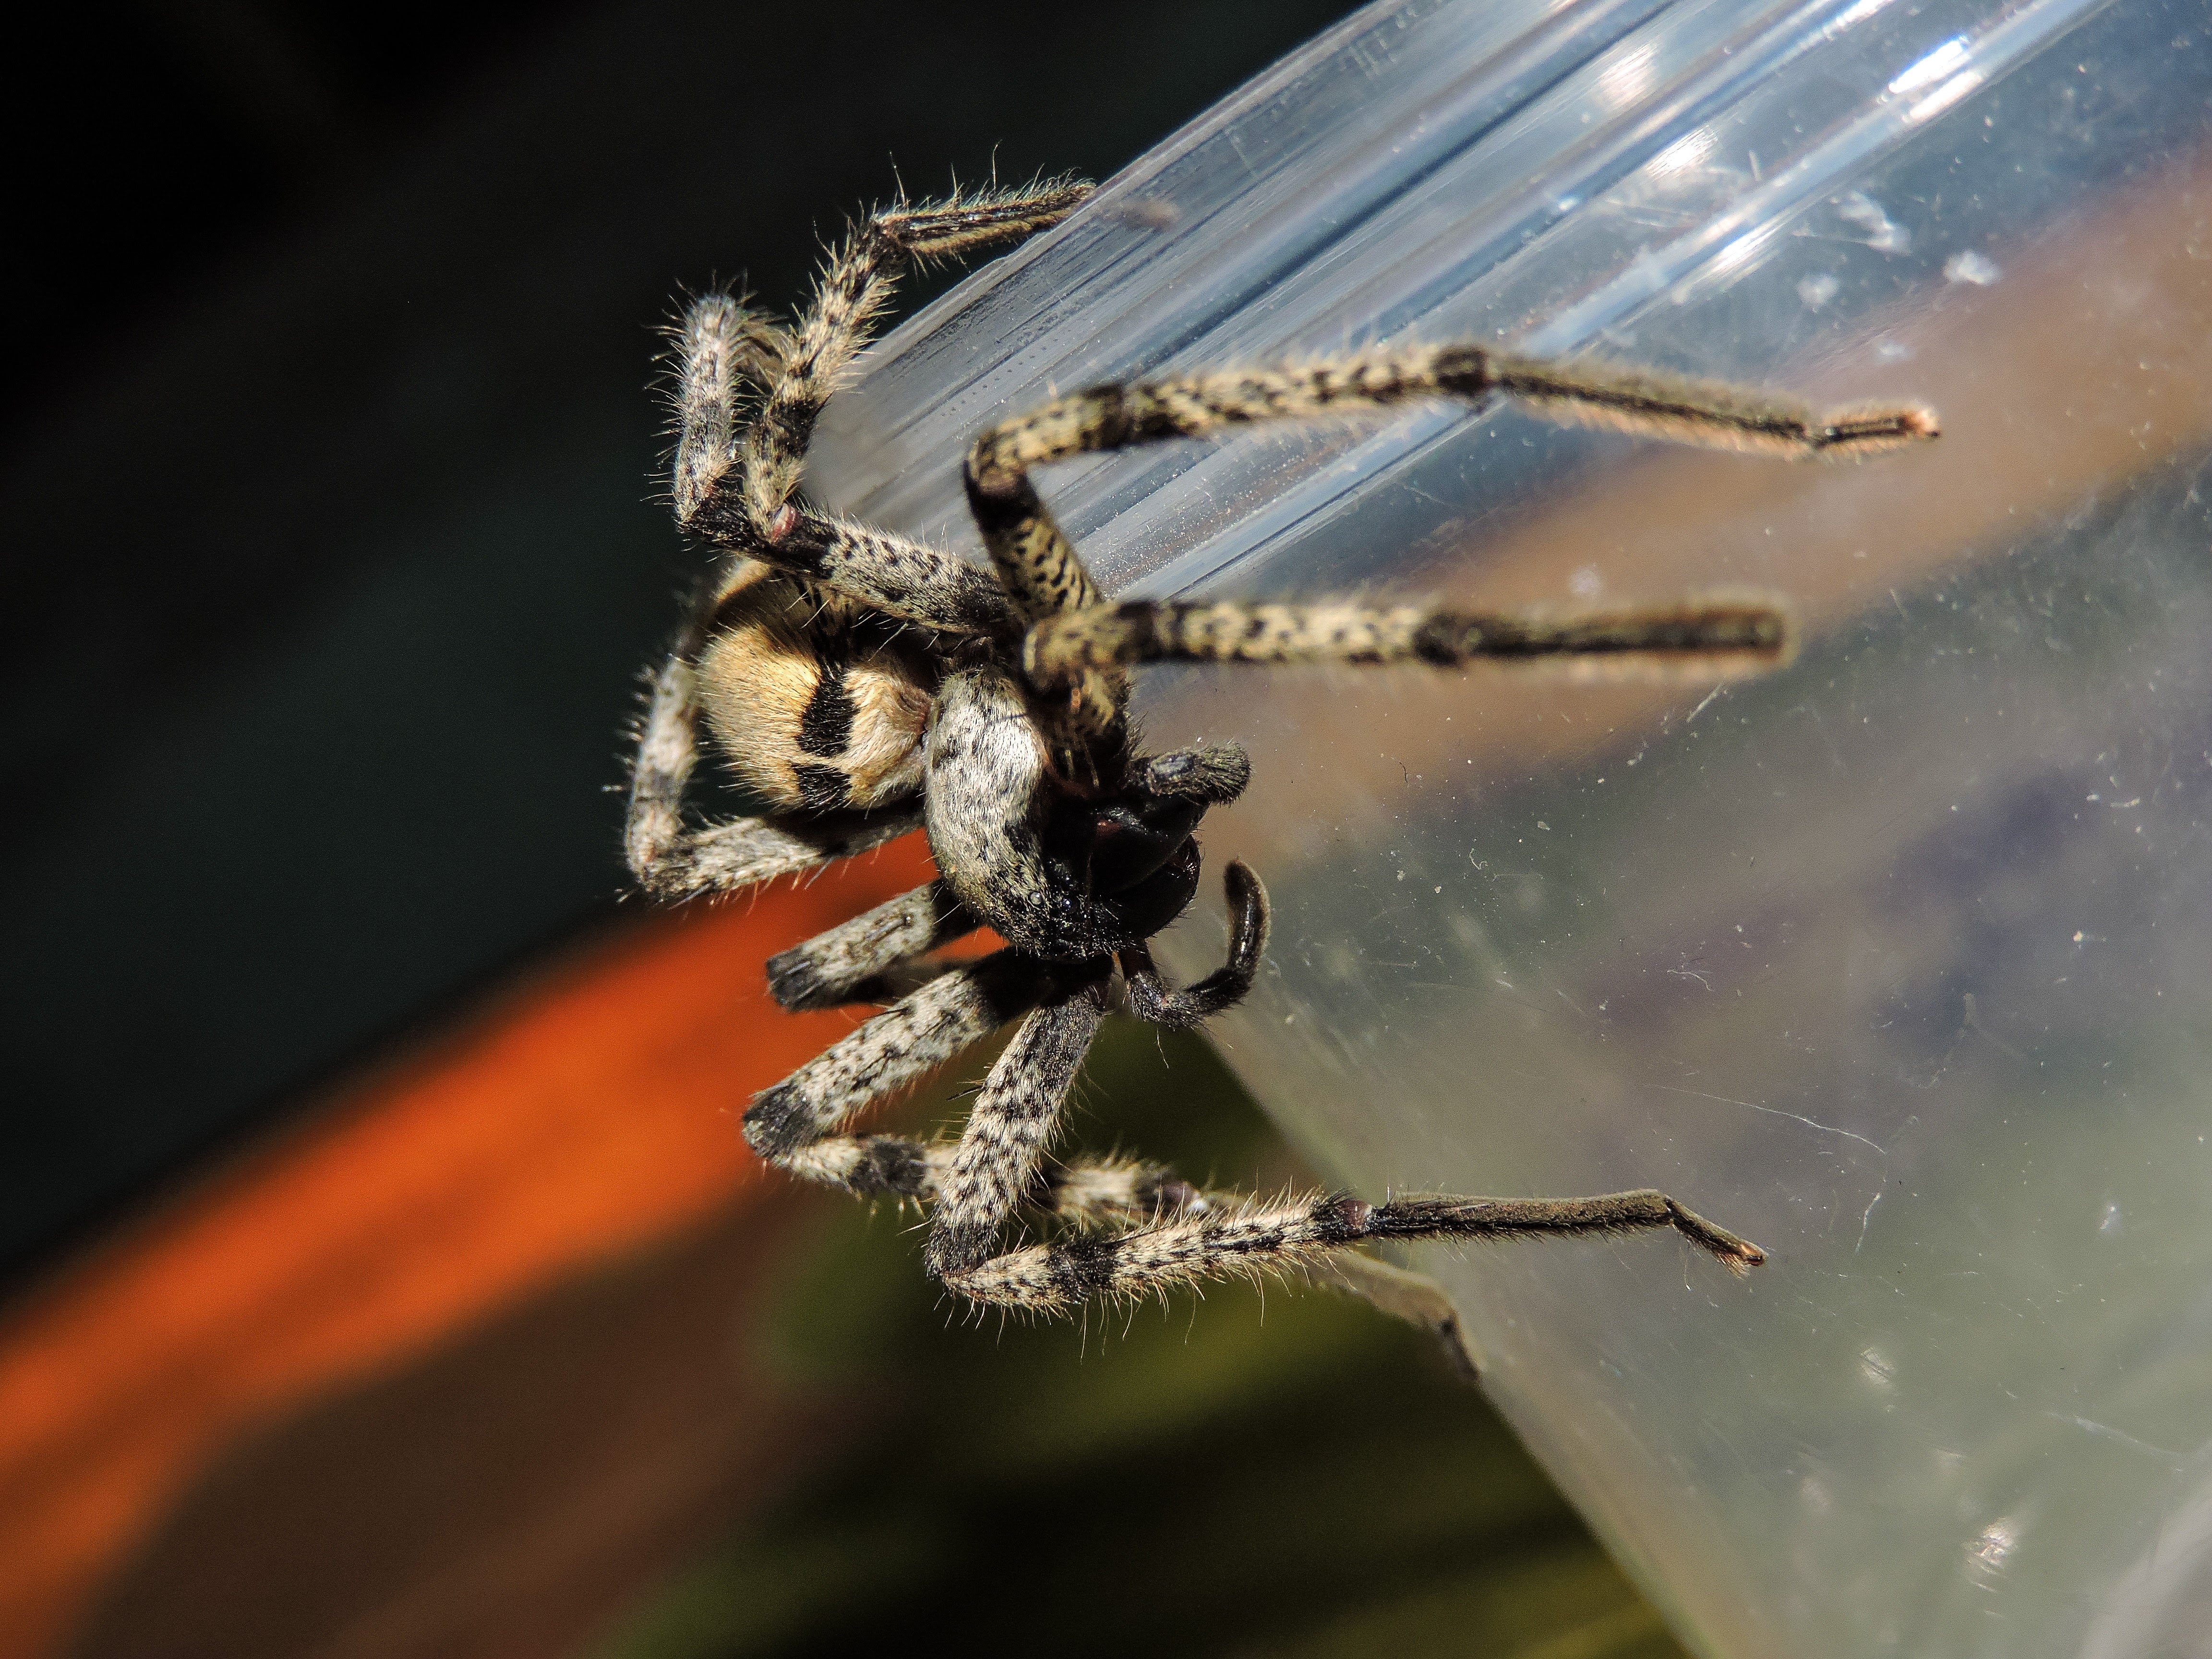 Jumping spider photo